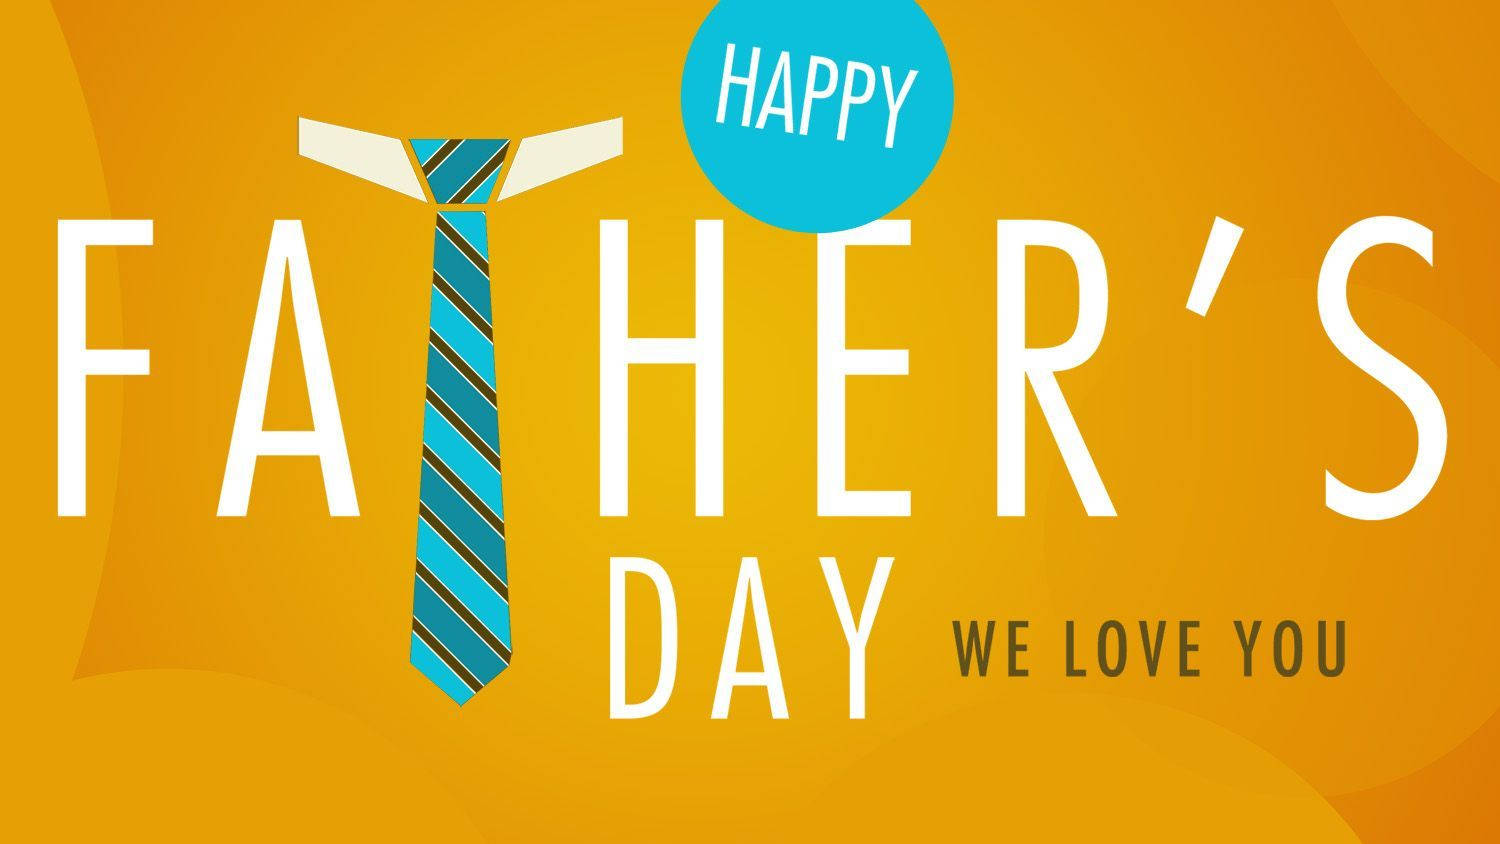 We Love You Happy Father's Day Card Wallpaper